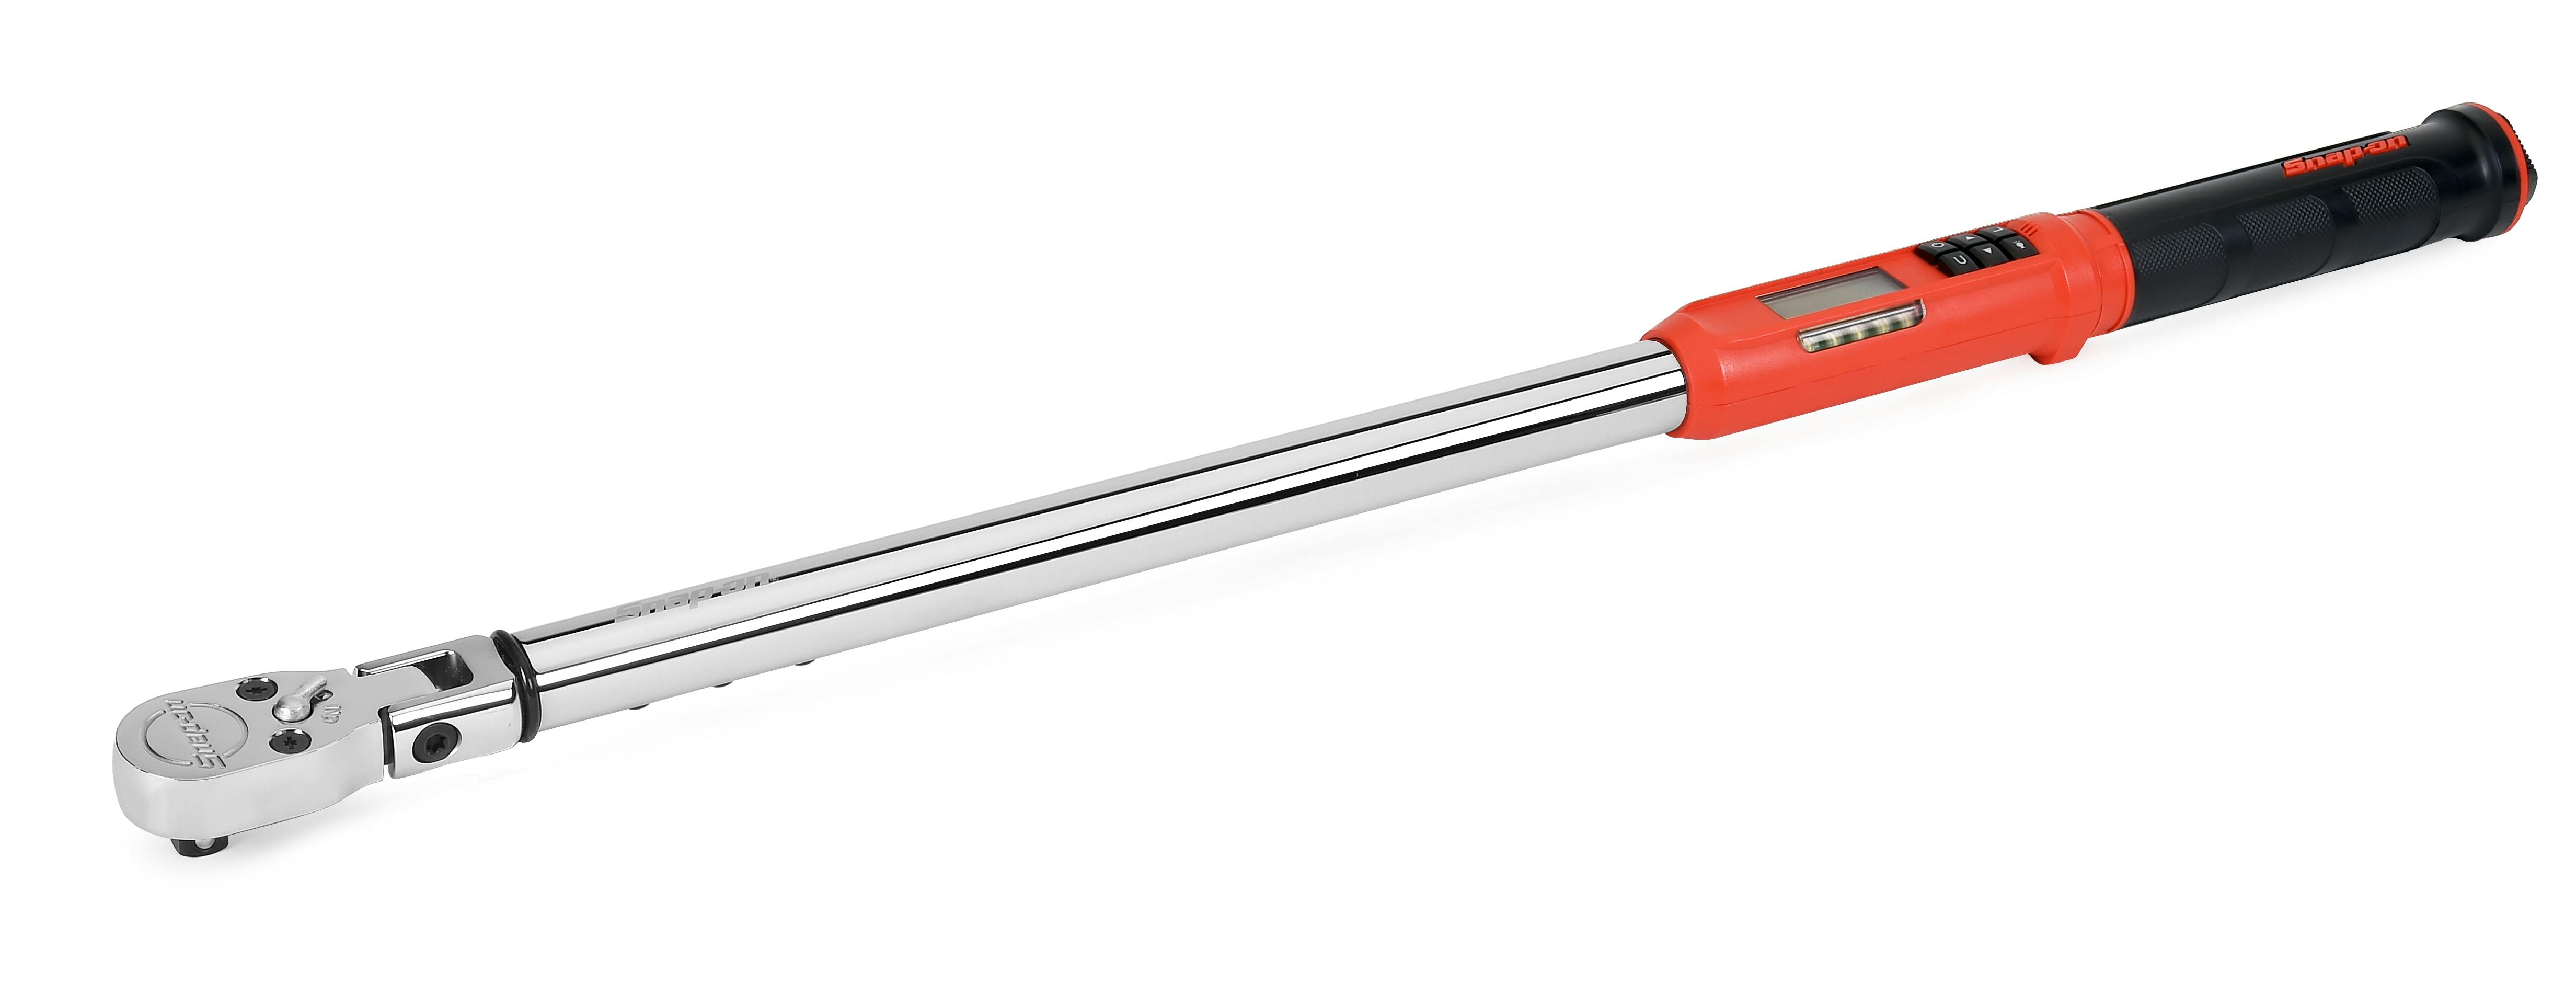 snap on digital torque wrench